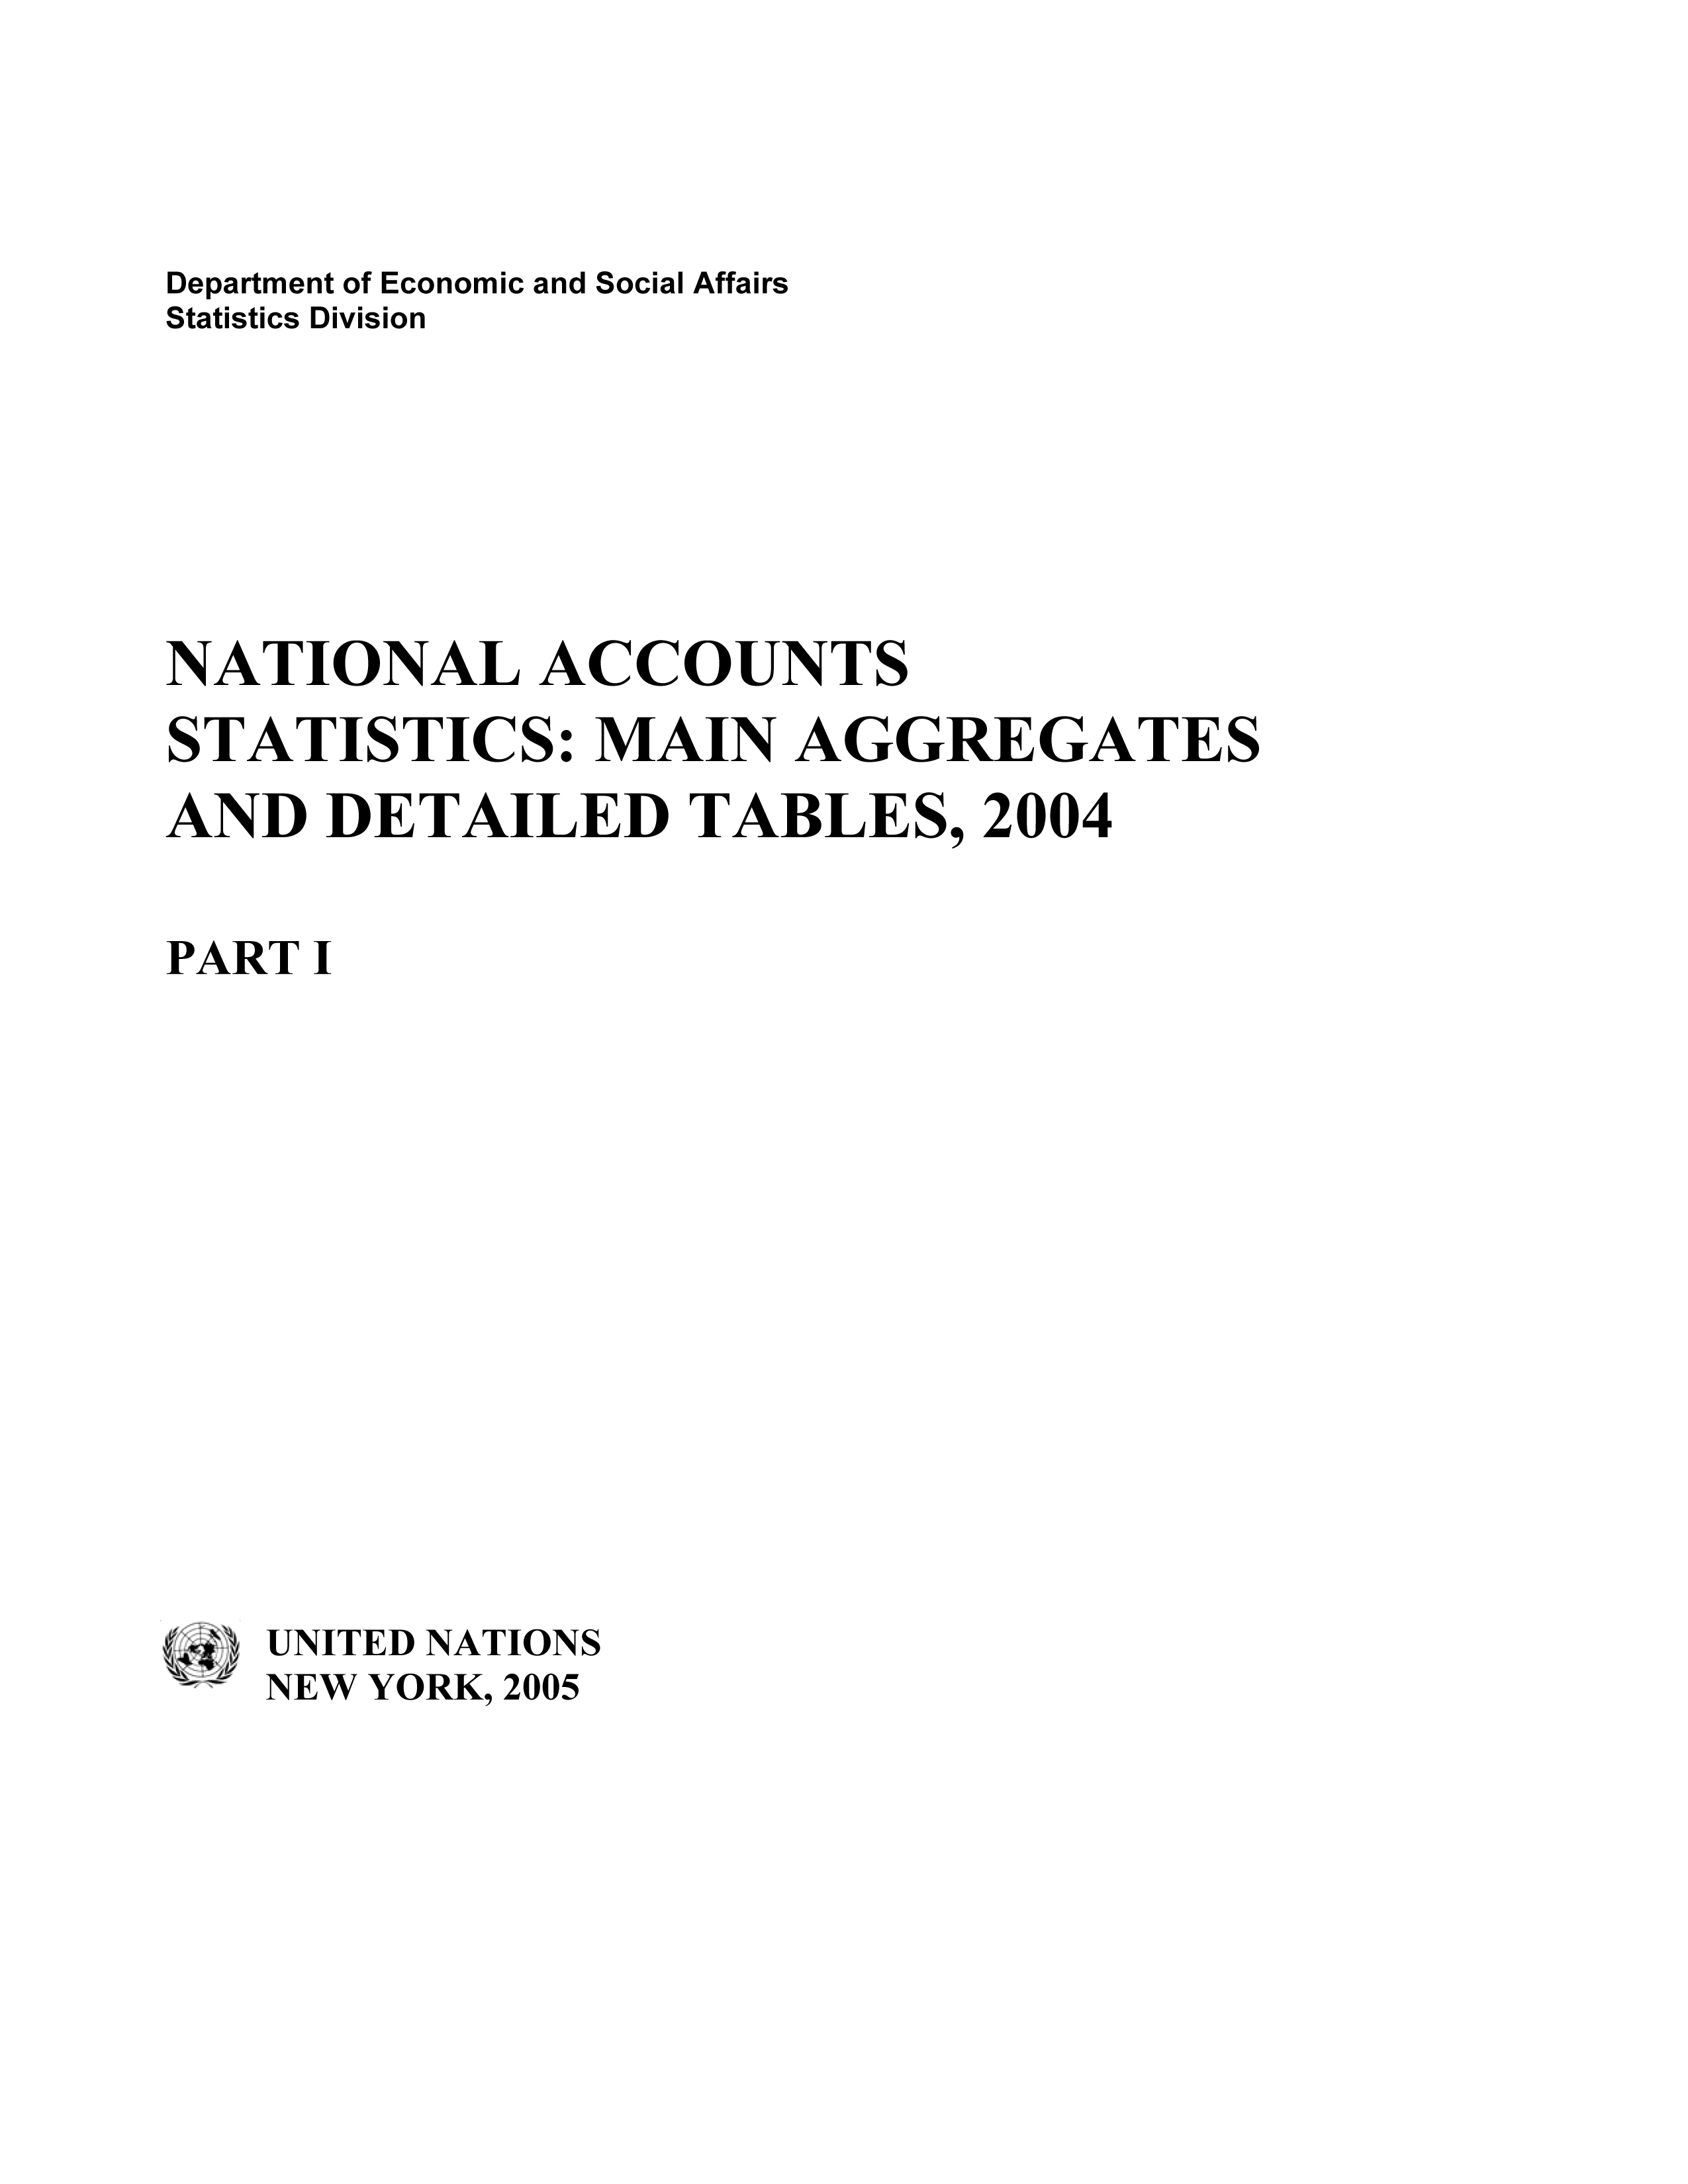 image of National Accounts Statistics: Main Aggregates and Detailed Tables 2004